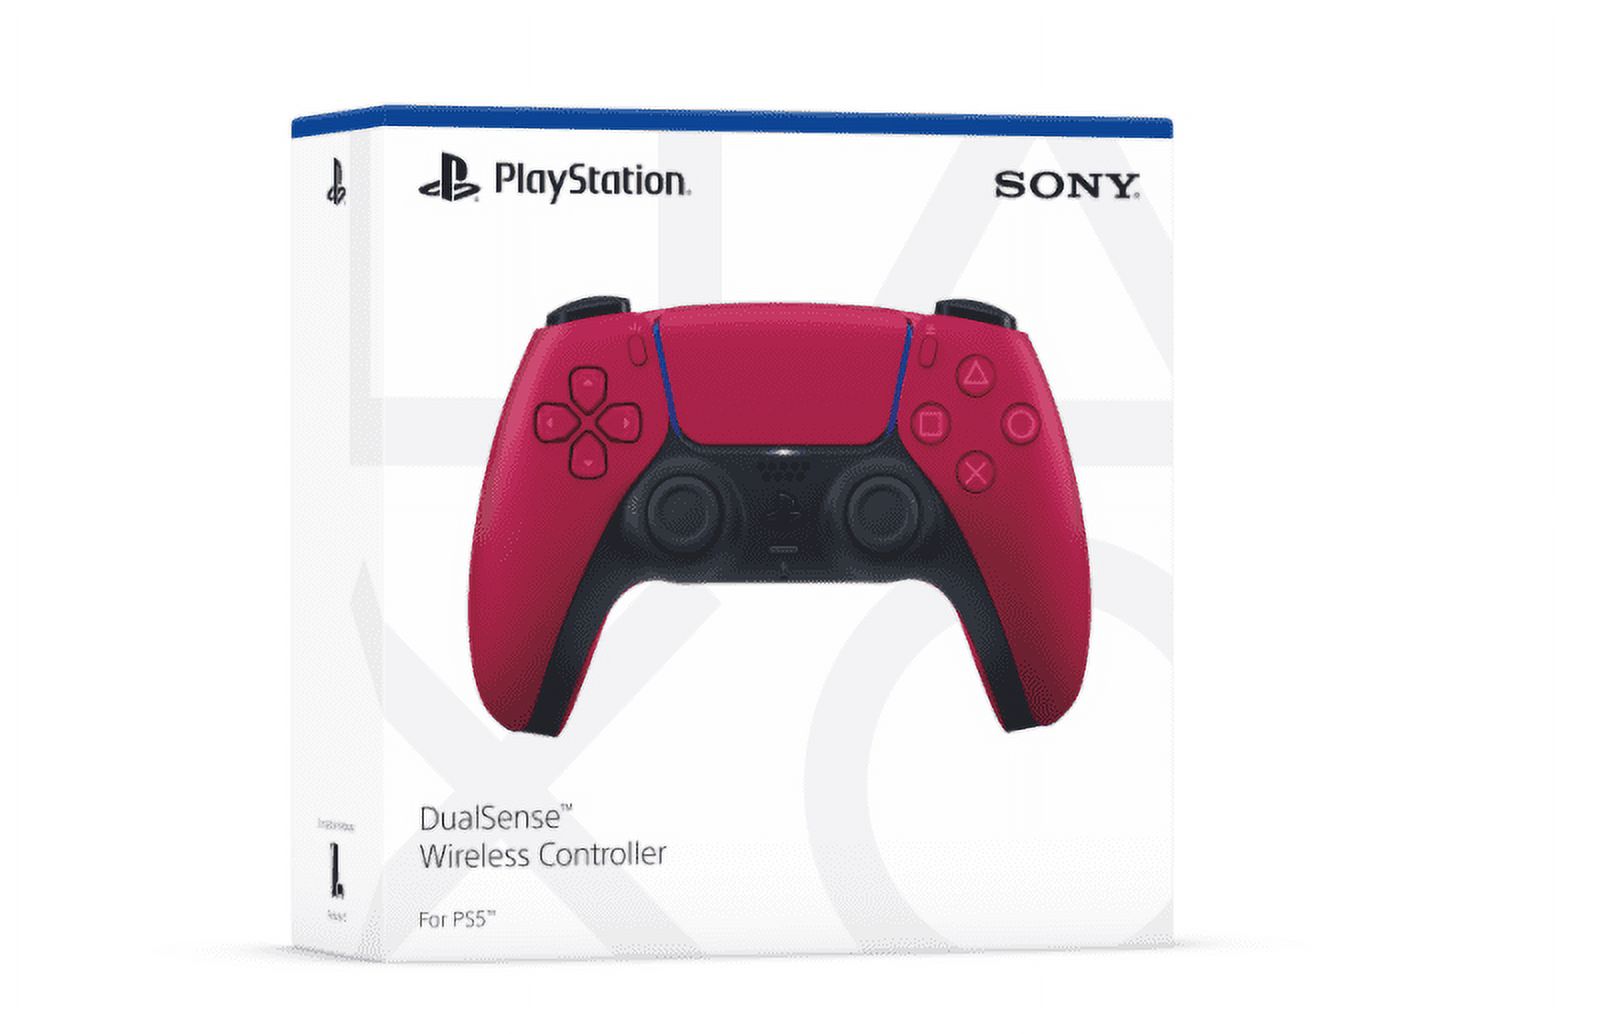 Sony PS5 DualSense Wireless Controller - Cosmic Red - image 3 of 11